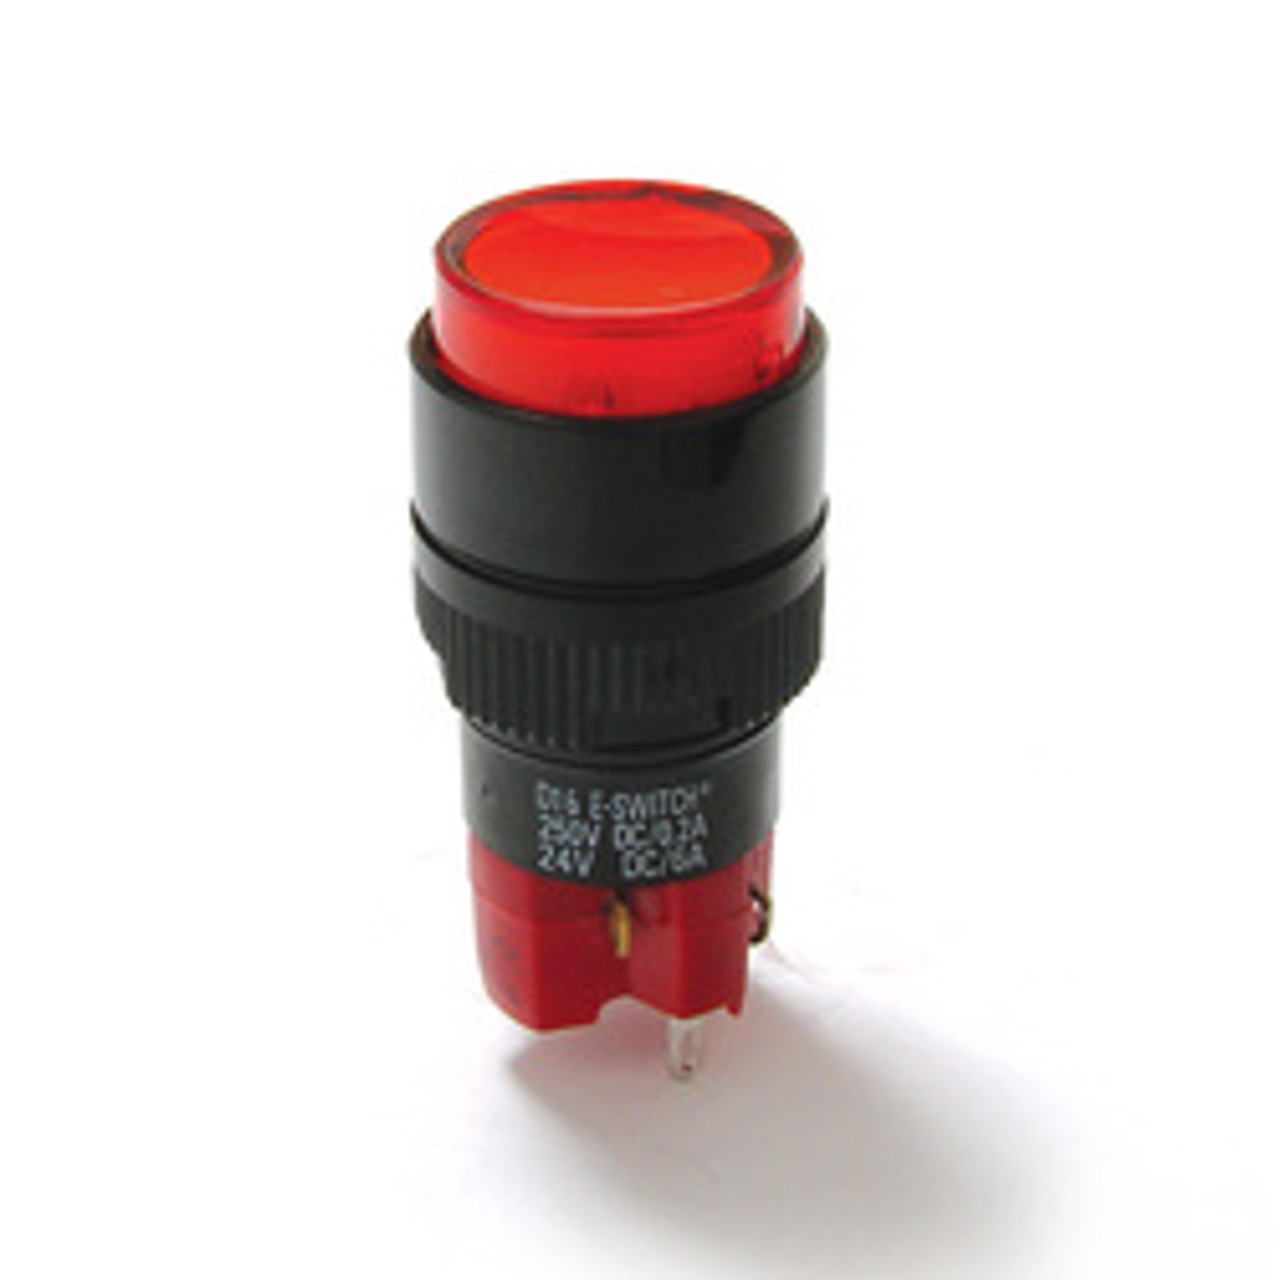 E-Switch D16OAR11FREDRED Pushbutton Switches